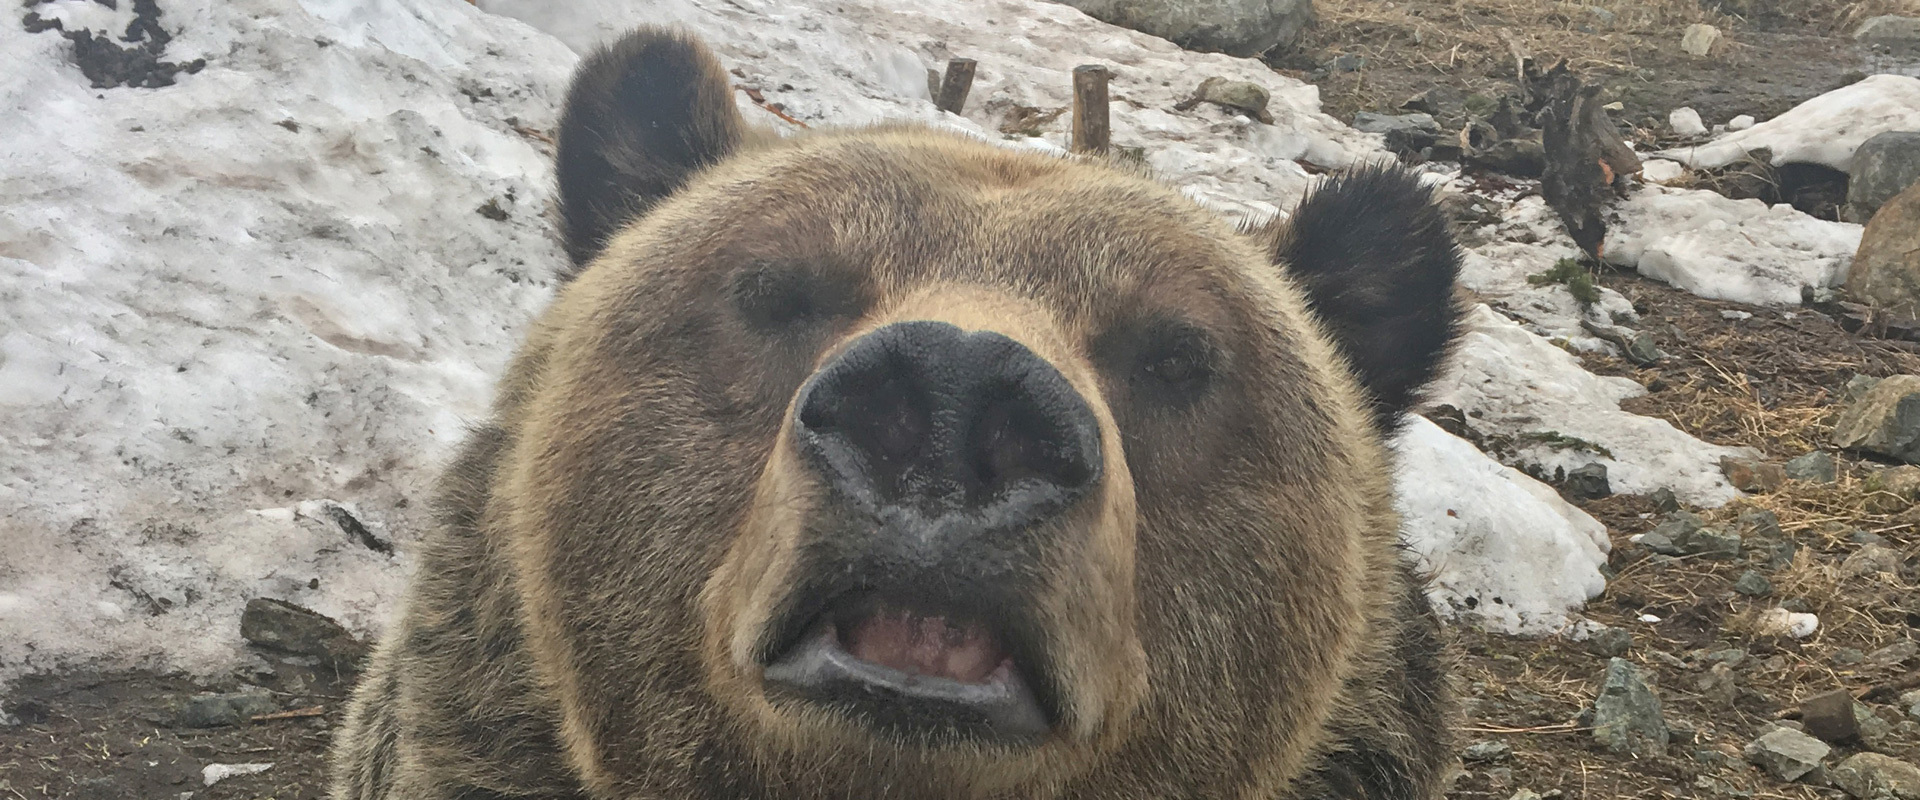 Grizzly bear weigh in after hibernation 